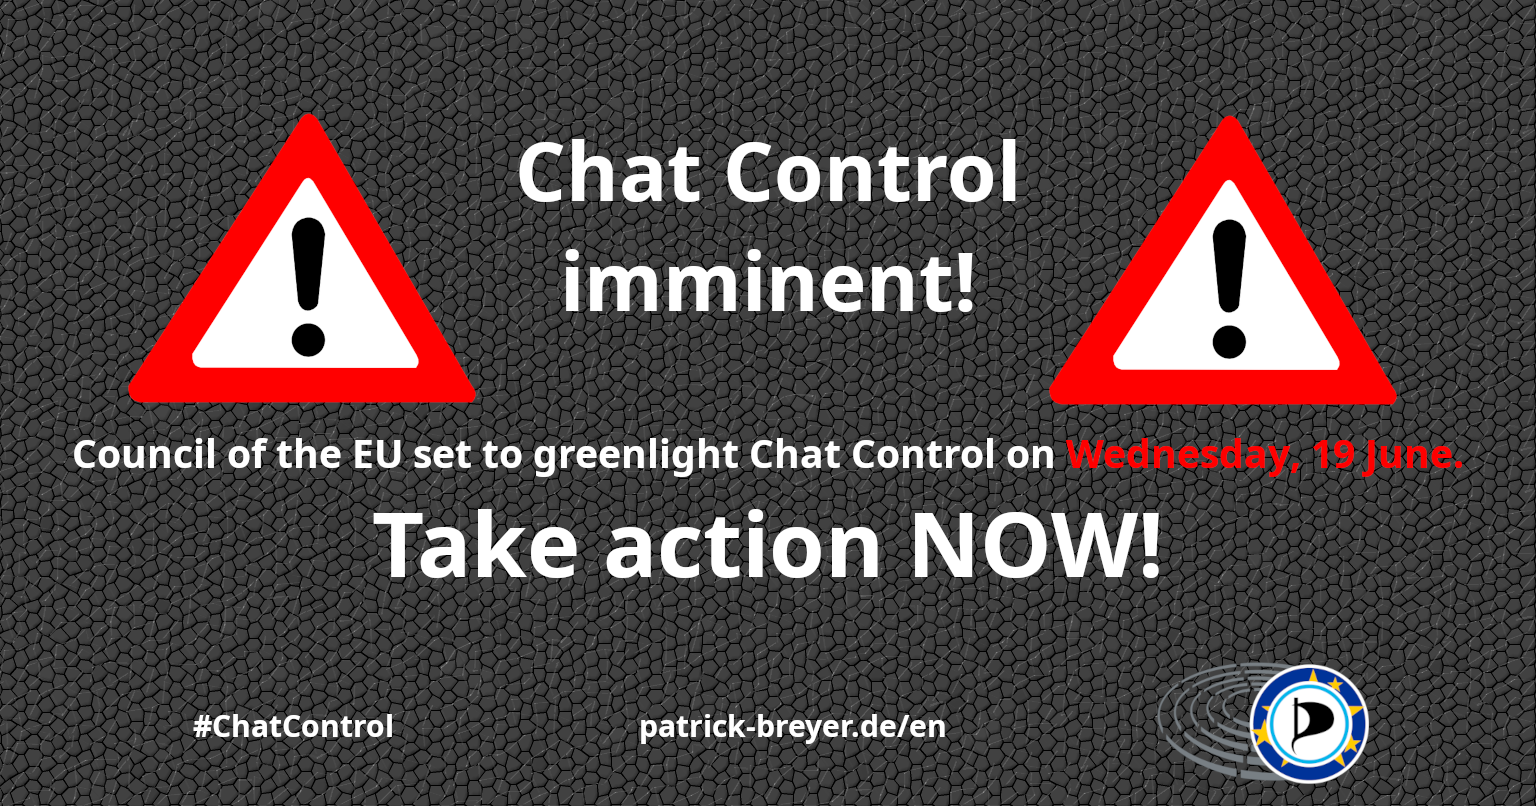 Warning signs and text: "Chat Control imminent! Council of the EU set to greenlight Chat Control on Wednesday, 19 June. Take action NOW! #ChatControl, patrick-breyer.de/en" and the logo of the European Pirates